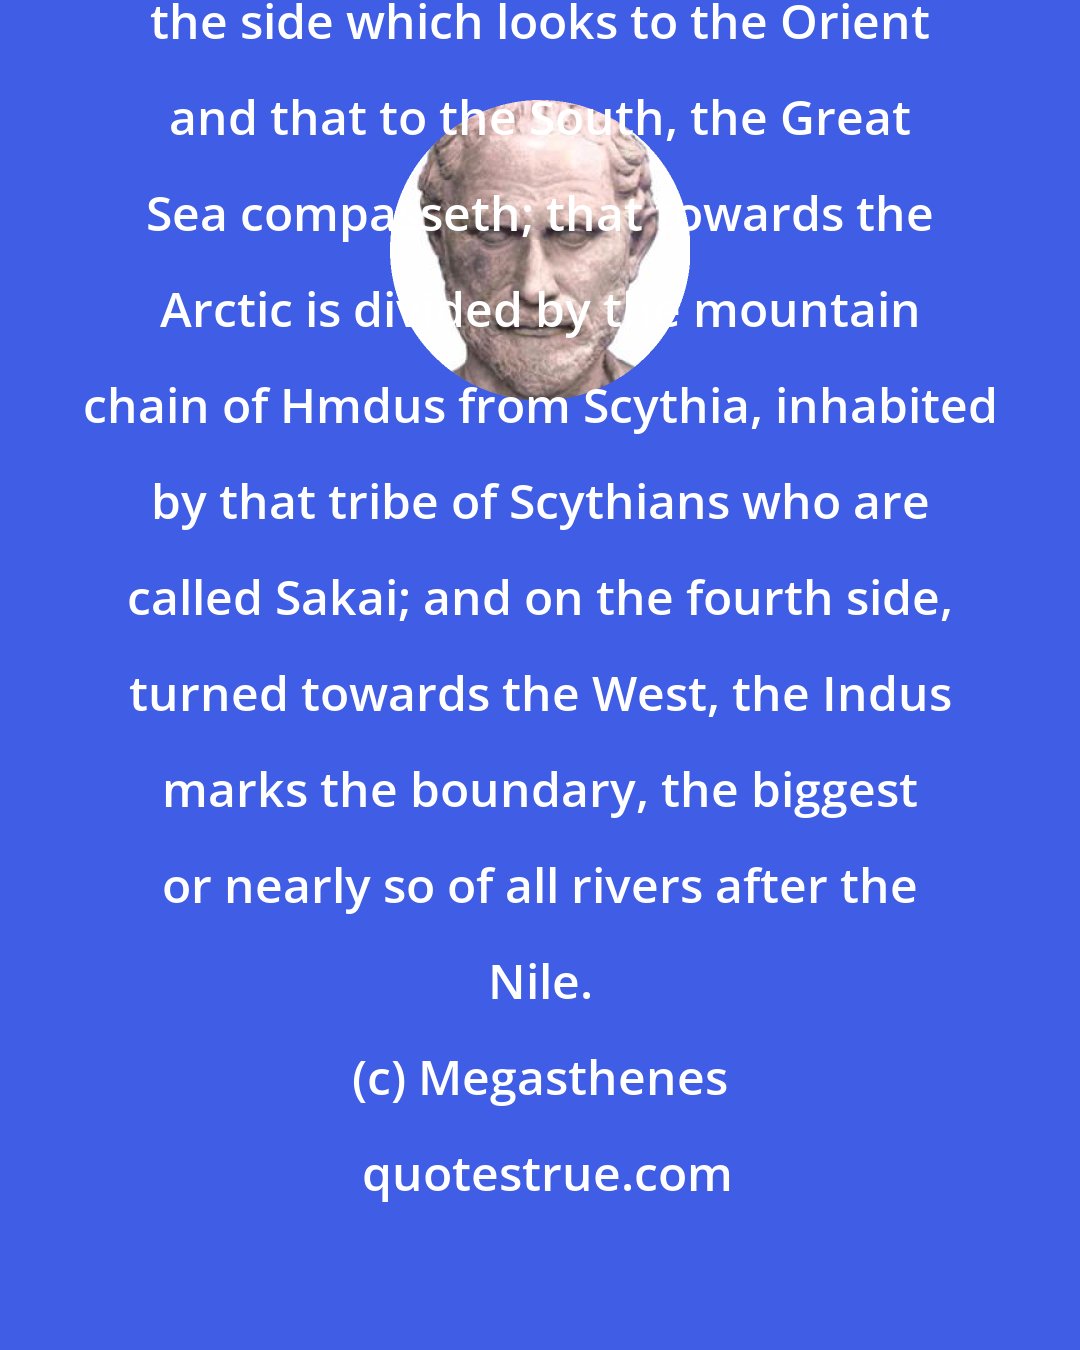 Megasthenes: India then being four-sided in plan, the side which looks to the Orient and that to the South, the Great Sea compasseth; that towards the Arctic is divided by the mountain chain of Hmdus from Scythia, inhabited by that tribe of Scythians who are called Sakai; and on the fourth side, turned towards the West, the Indus marks the boundary, the biggest or nearly so of all rivers after the Nile.